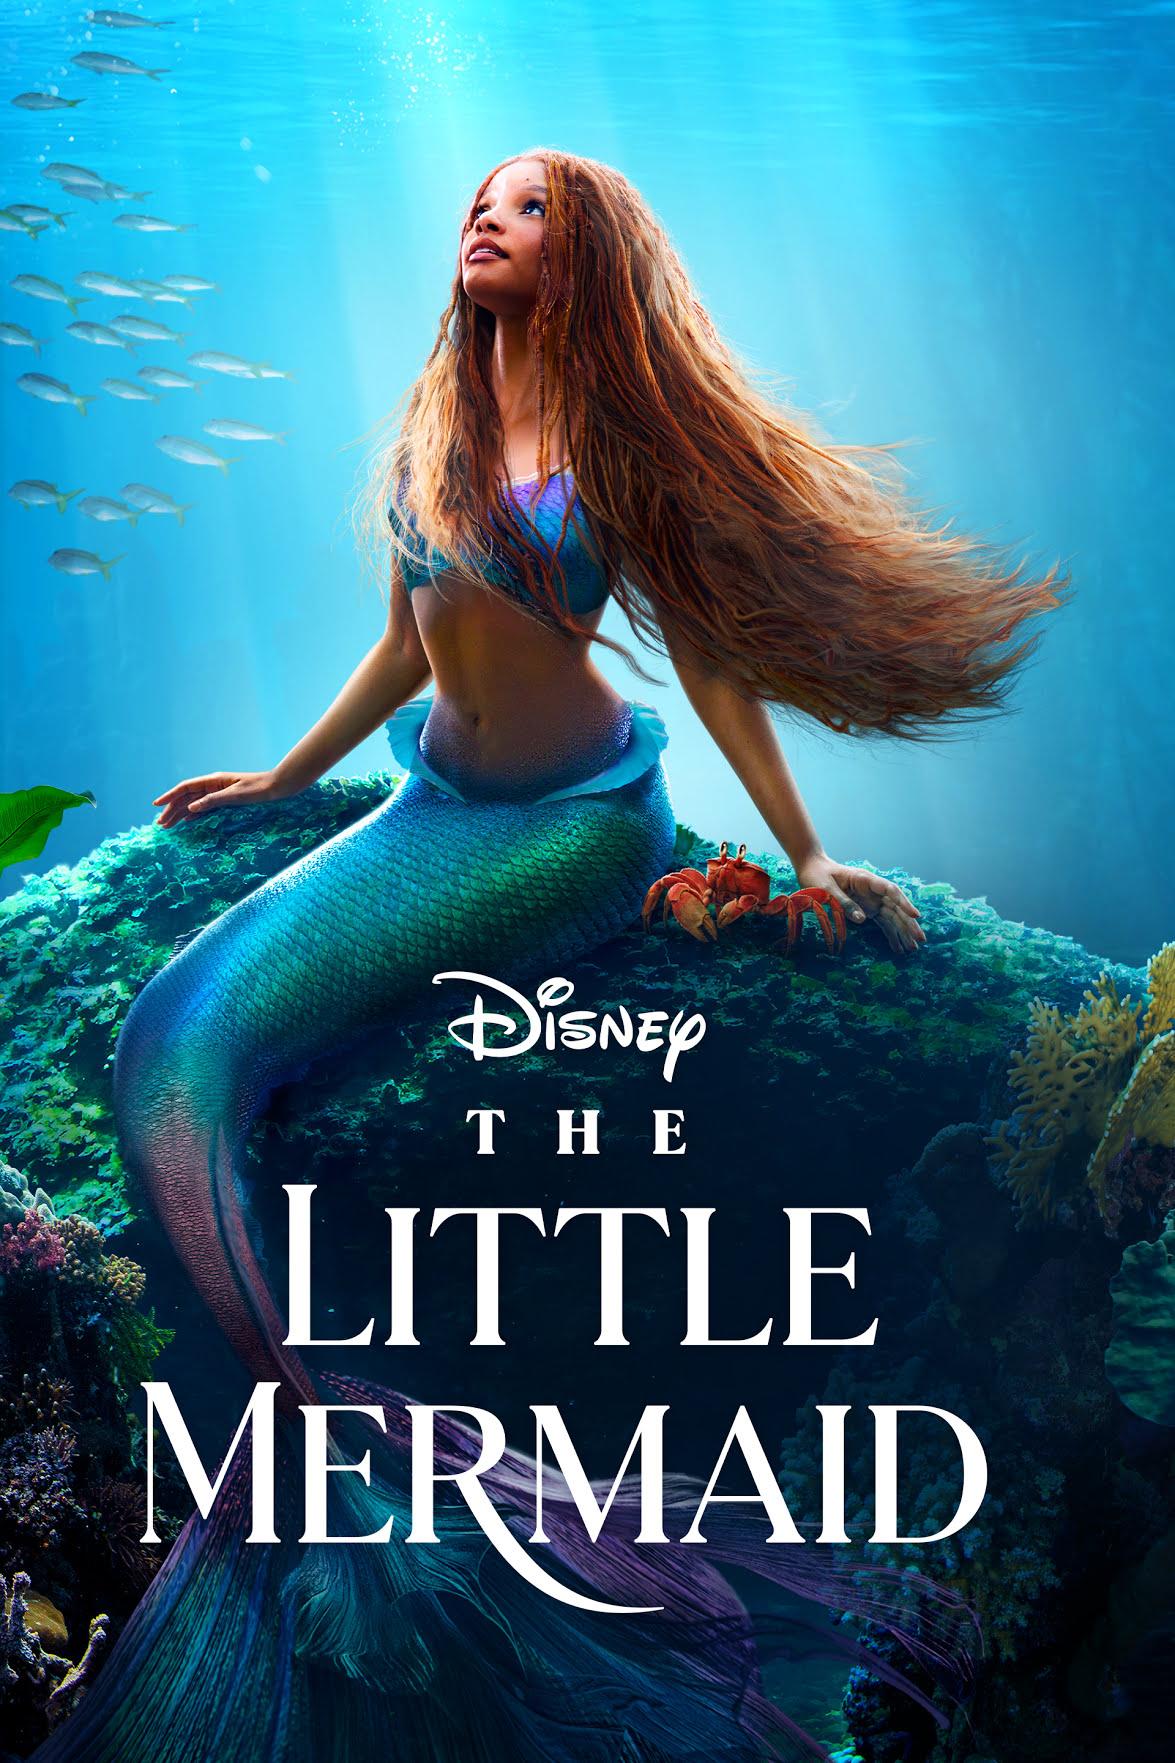 Image of the movie poster for the live action Little Mermaid film featuring a mermaid sitting on a rock.